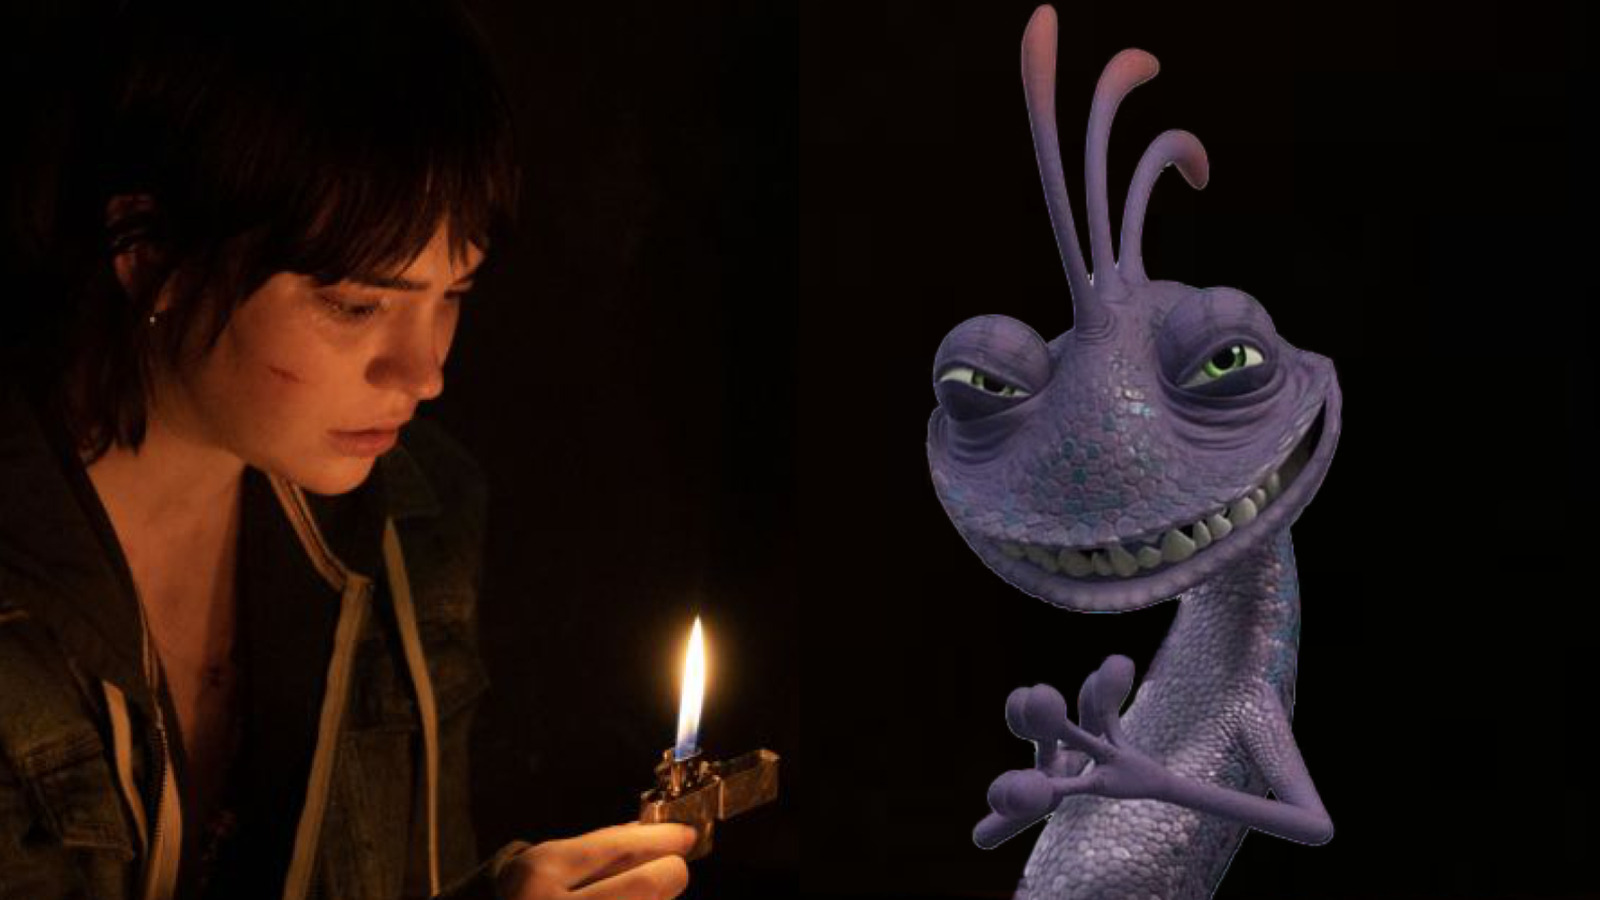 What If Stephen King's Boogeyman Is Just Randall From Monsters, Inc.?